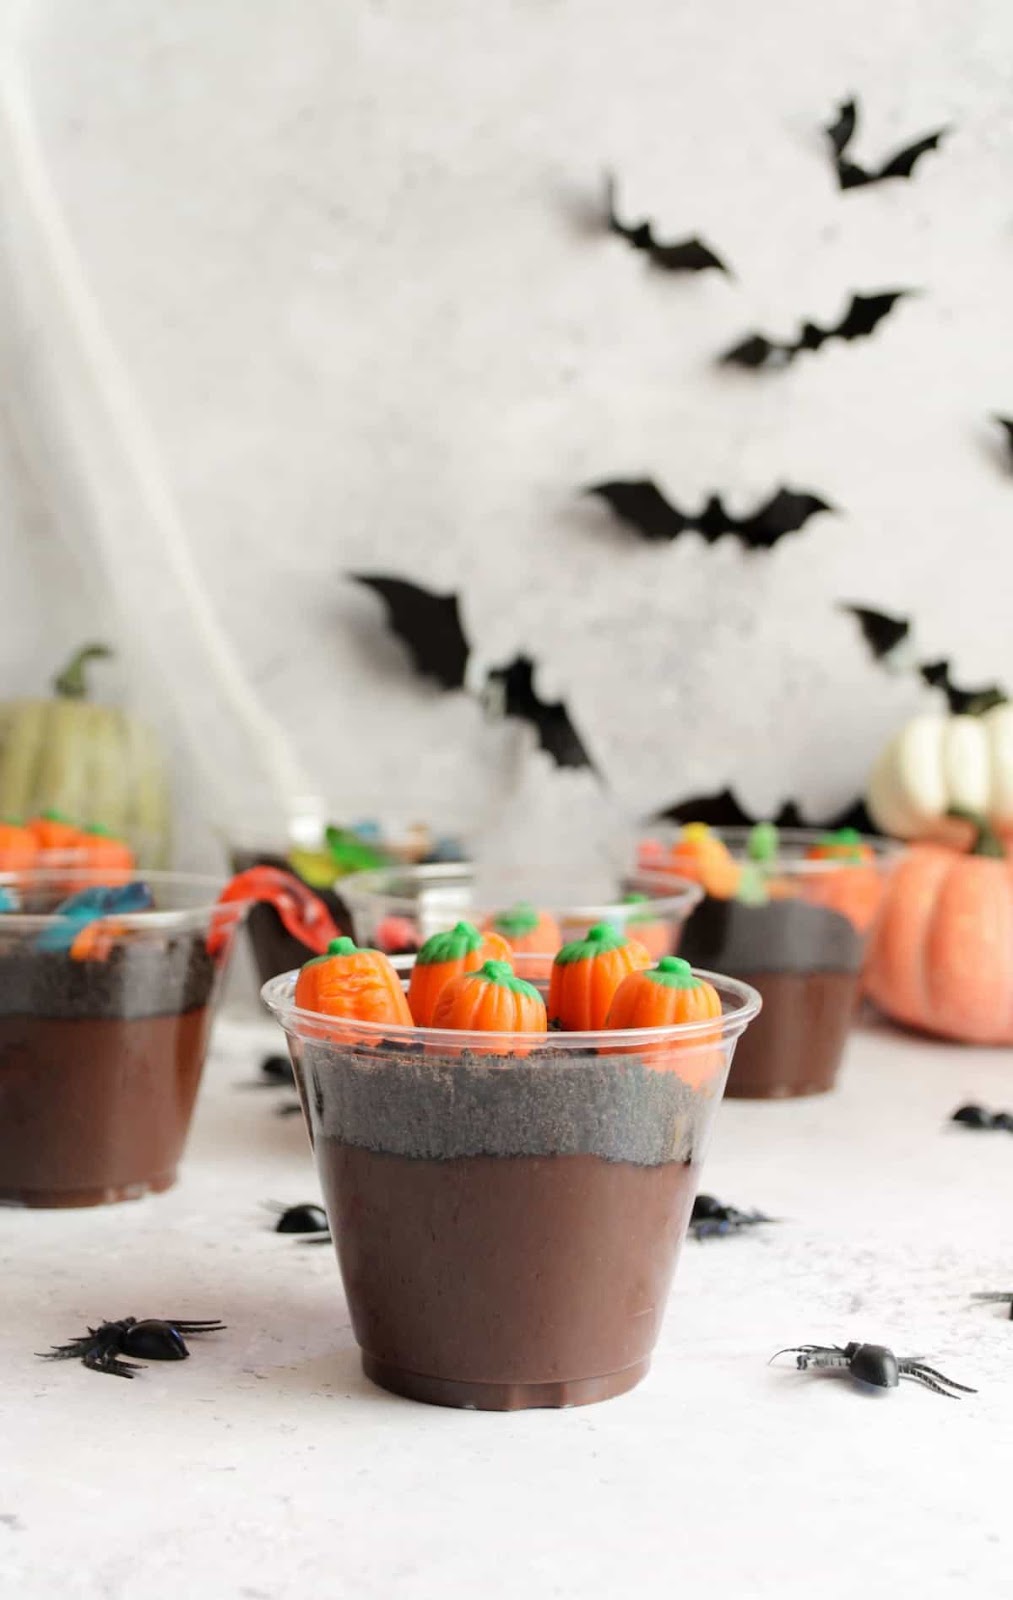 Dirt cups shown in plastic cups, decorated with candy corn pumpkins.